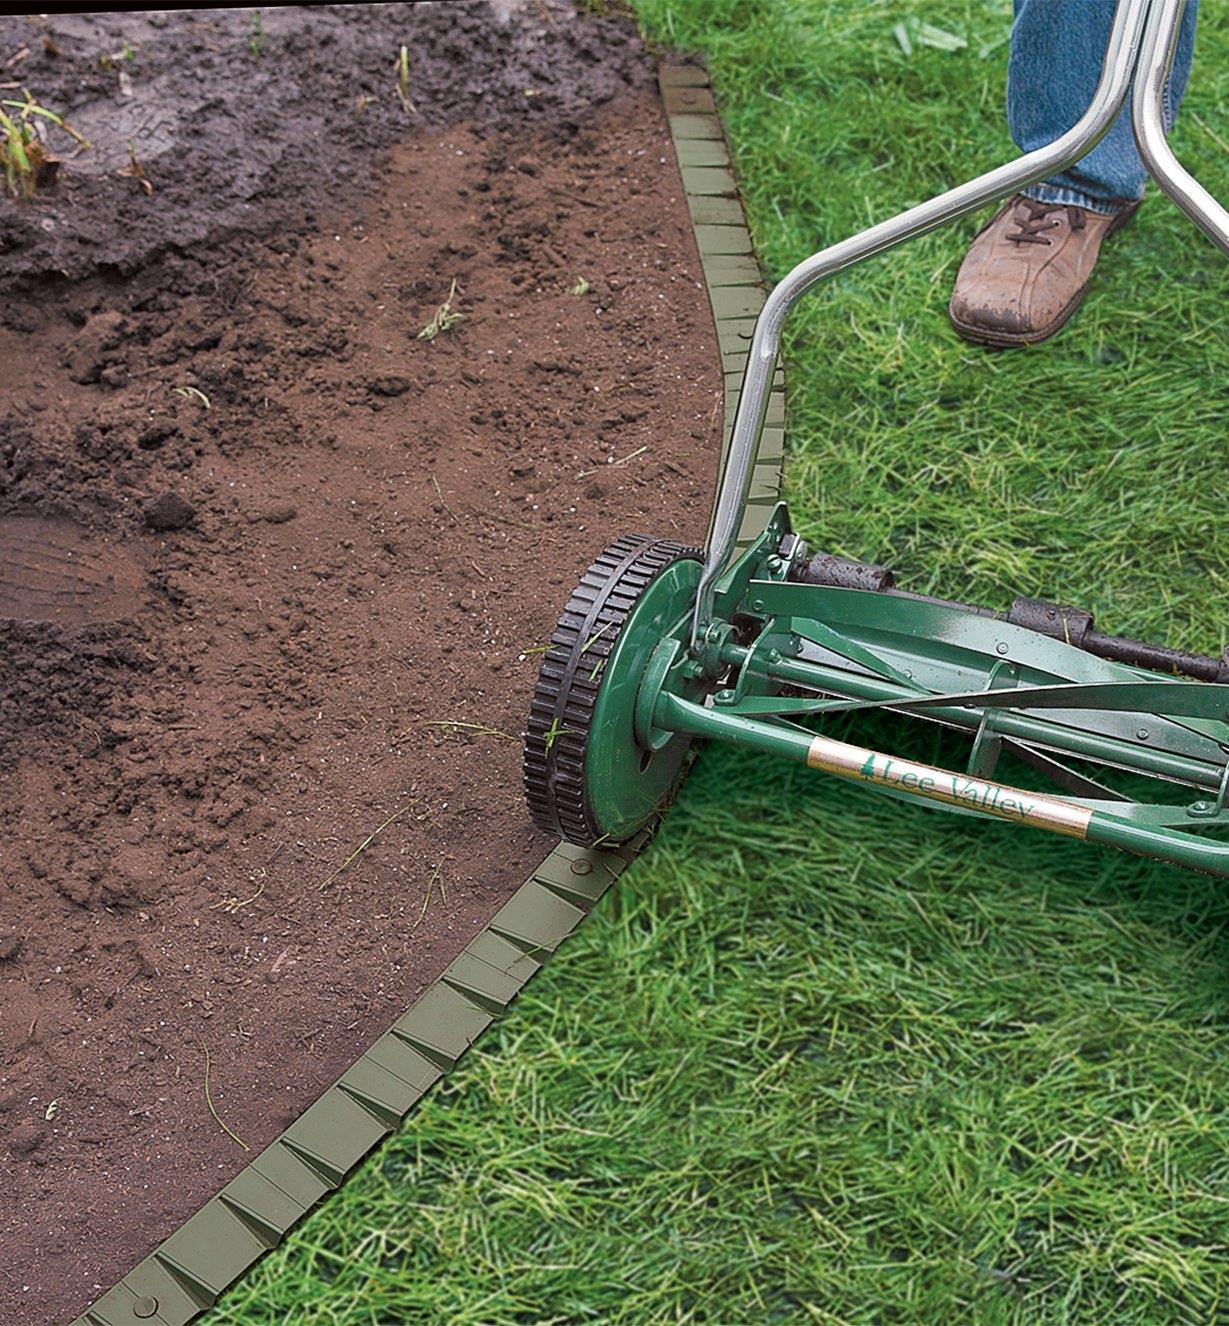 A reel mower rolls over installed Flexible Lawn Edging